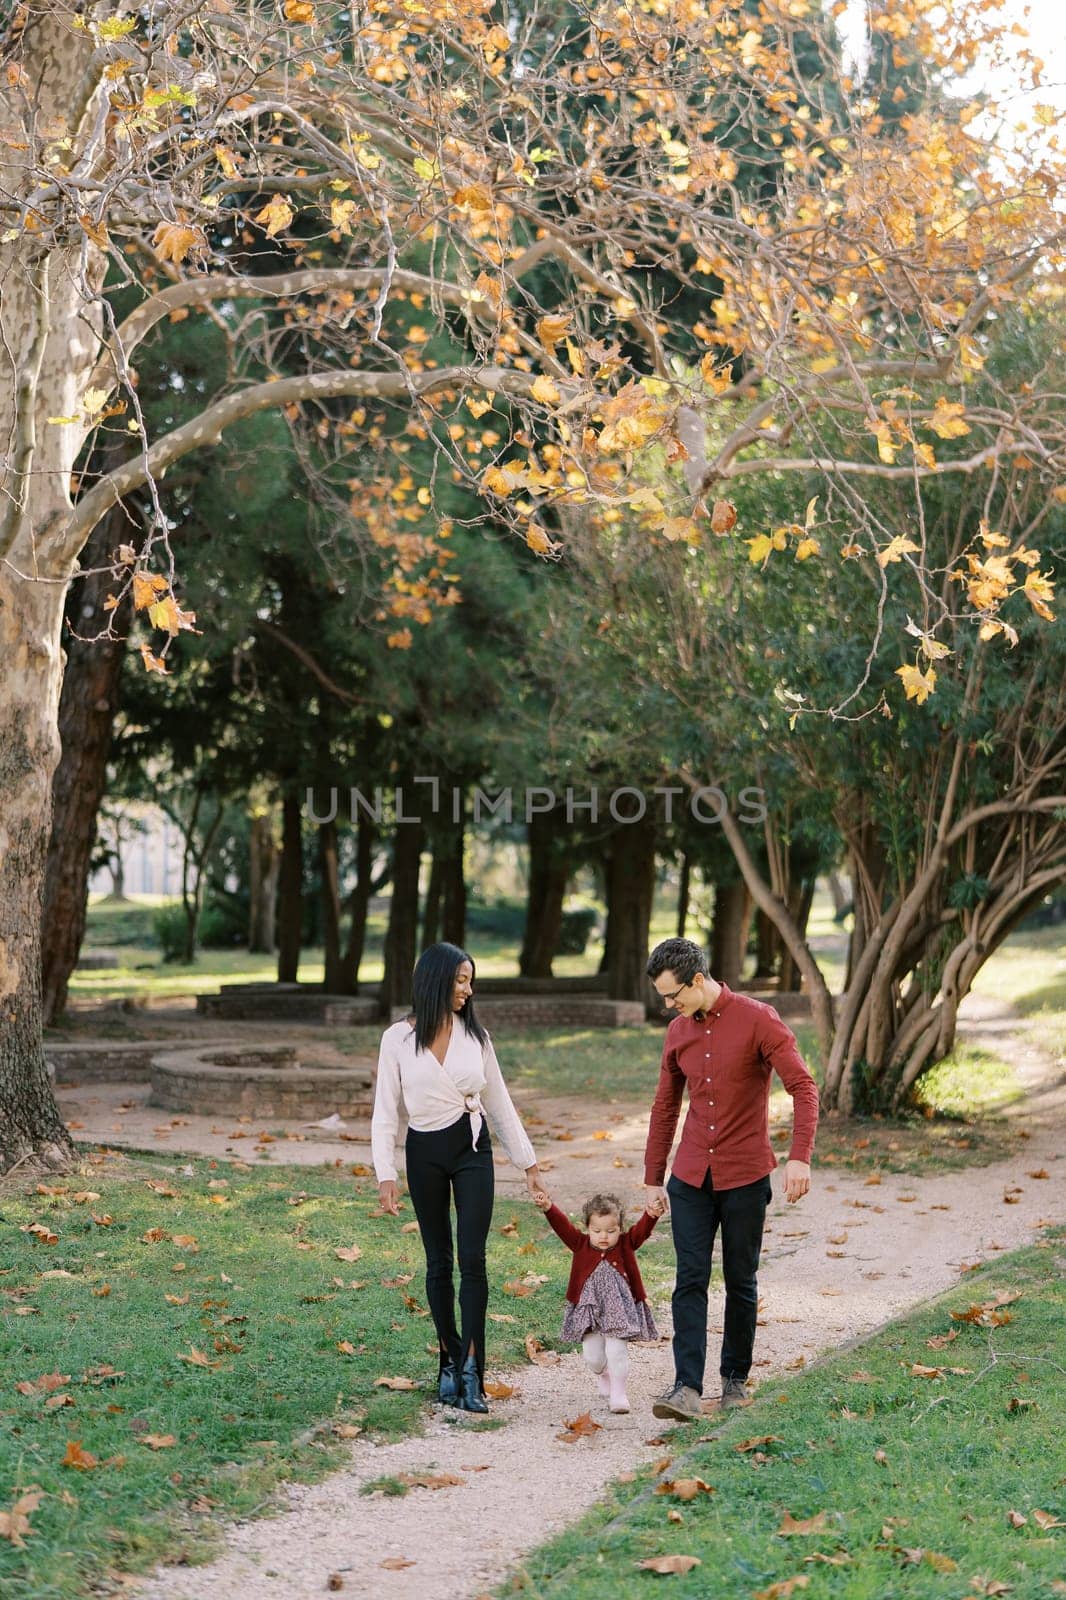 Mom and dad with a little girl walk along the path in the park, holding hands. High quality photo